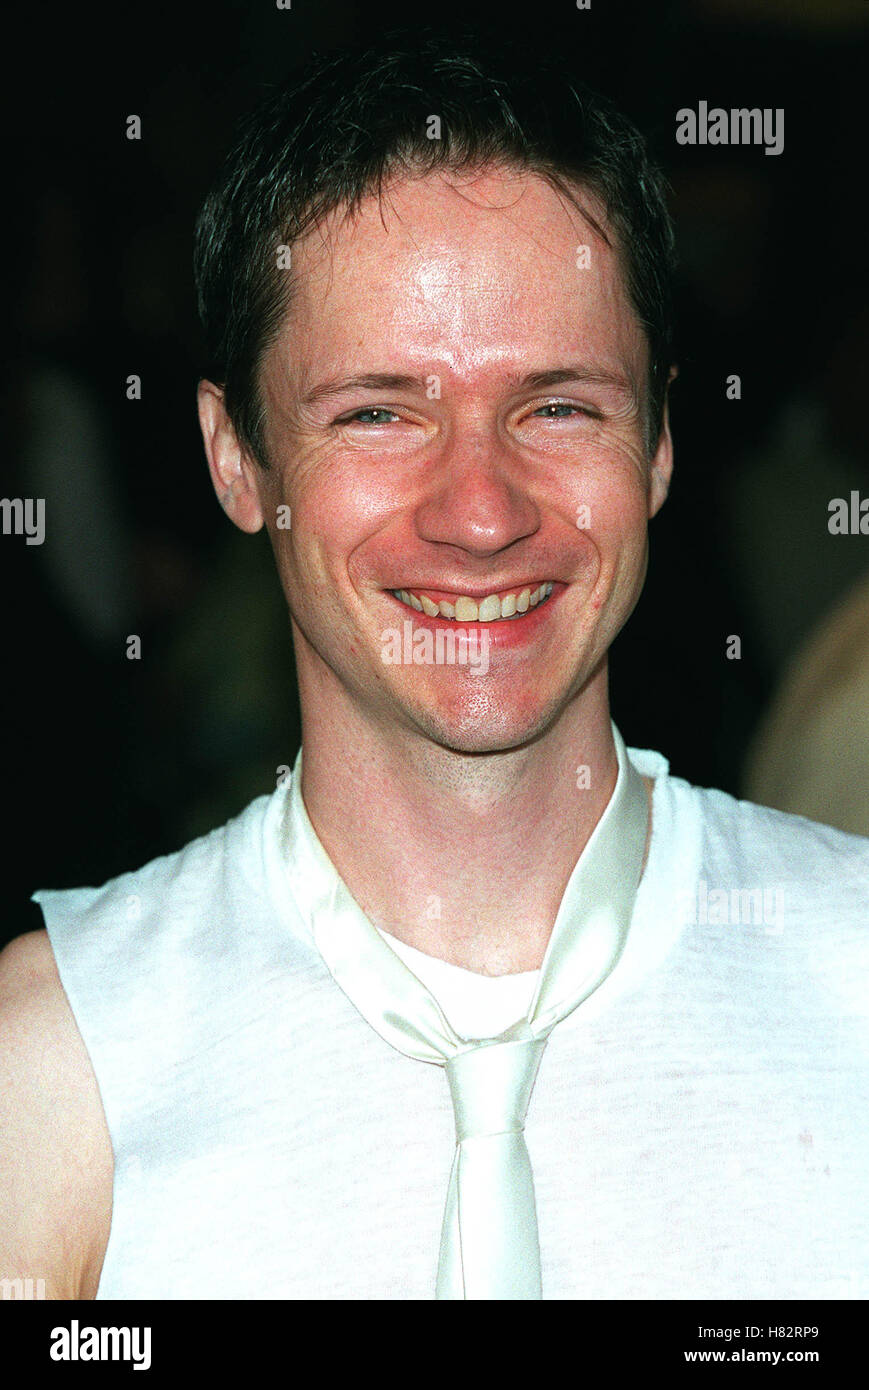 JOHN CAMERON MITCHELL 'HEDWIG AND THE ANGRY INCH'F-P LOS ANGELES USA 12 July 2001 Stock Photo